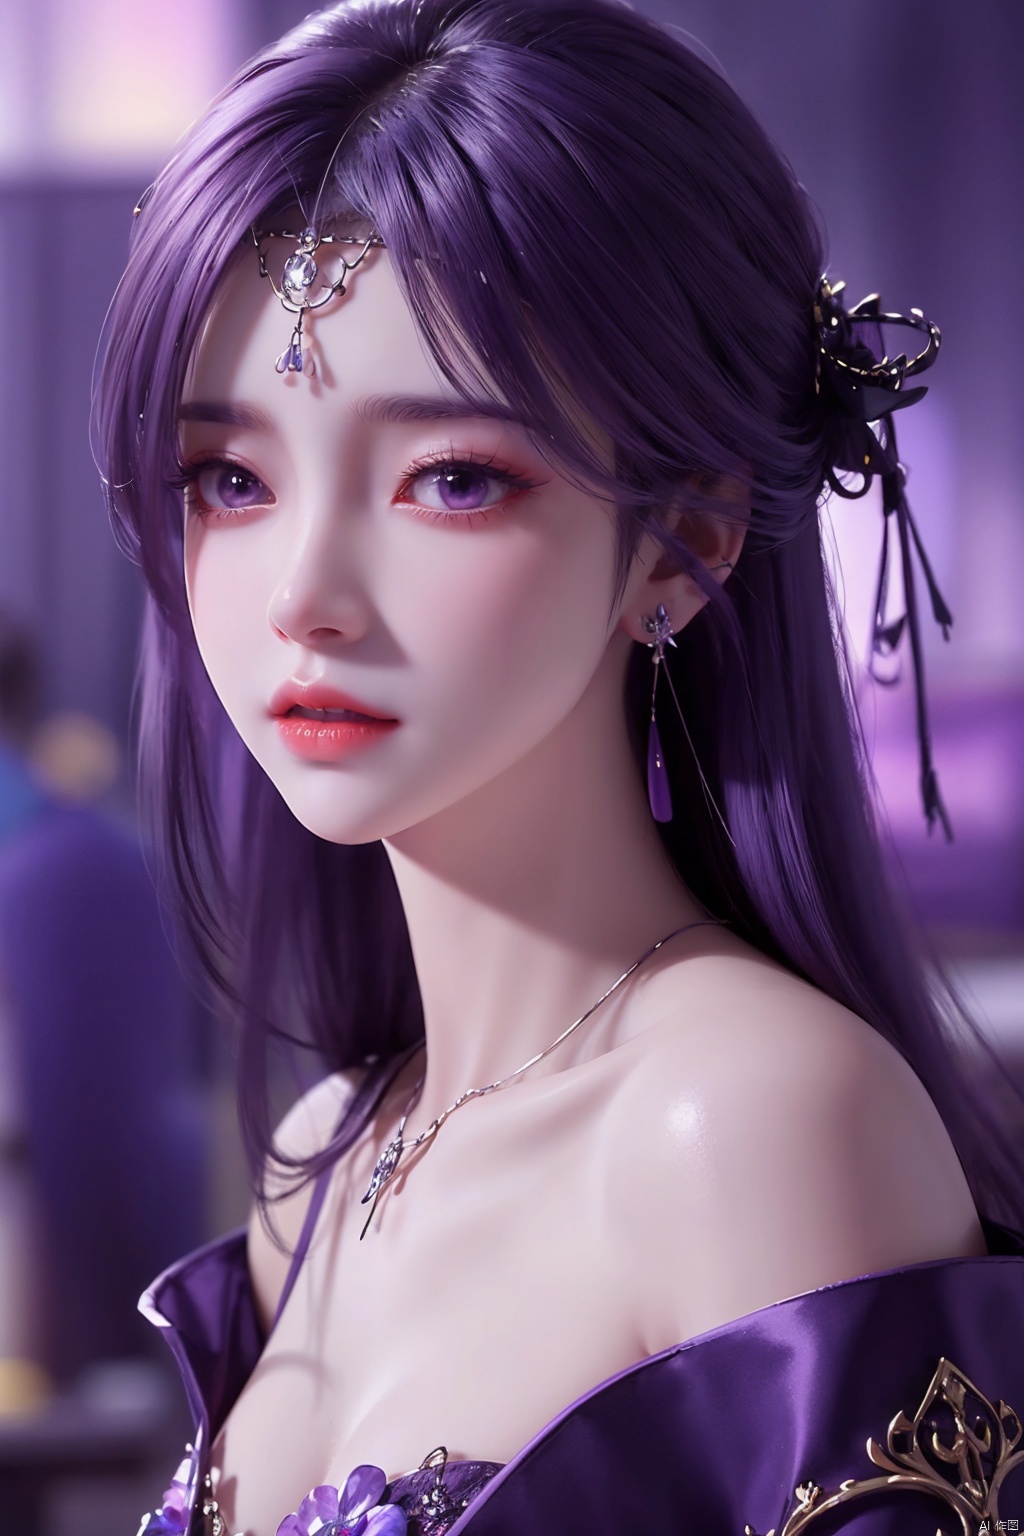  1girl
￼
solo
￼
long hair
￼
jewelry
￼
closed mouth
￼
purple eyes
￼
purple hair
￼
earrings
￼
blurry
￼
lips
￼
blurry background
￼
expressionless
￼
portrait
￼
TMS-yx
￼
orthofacial